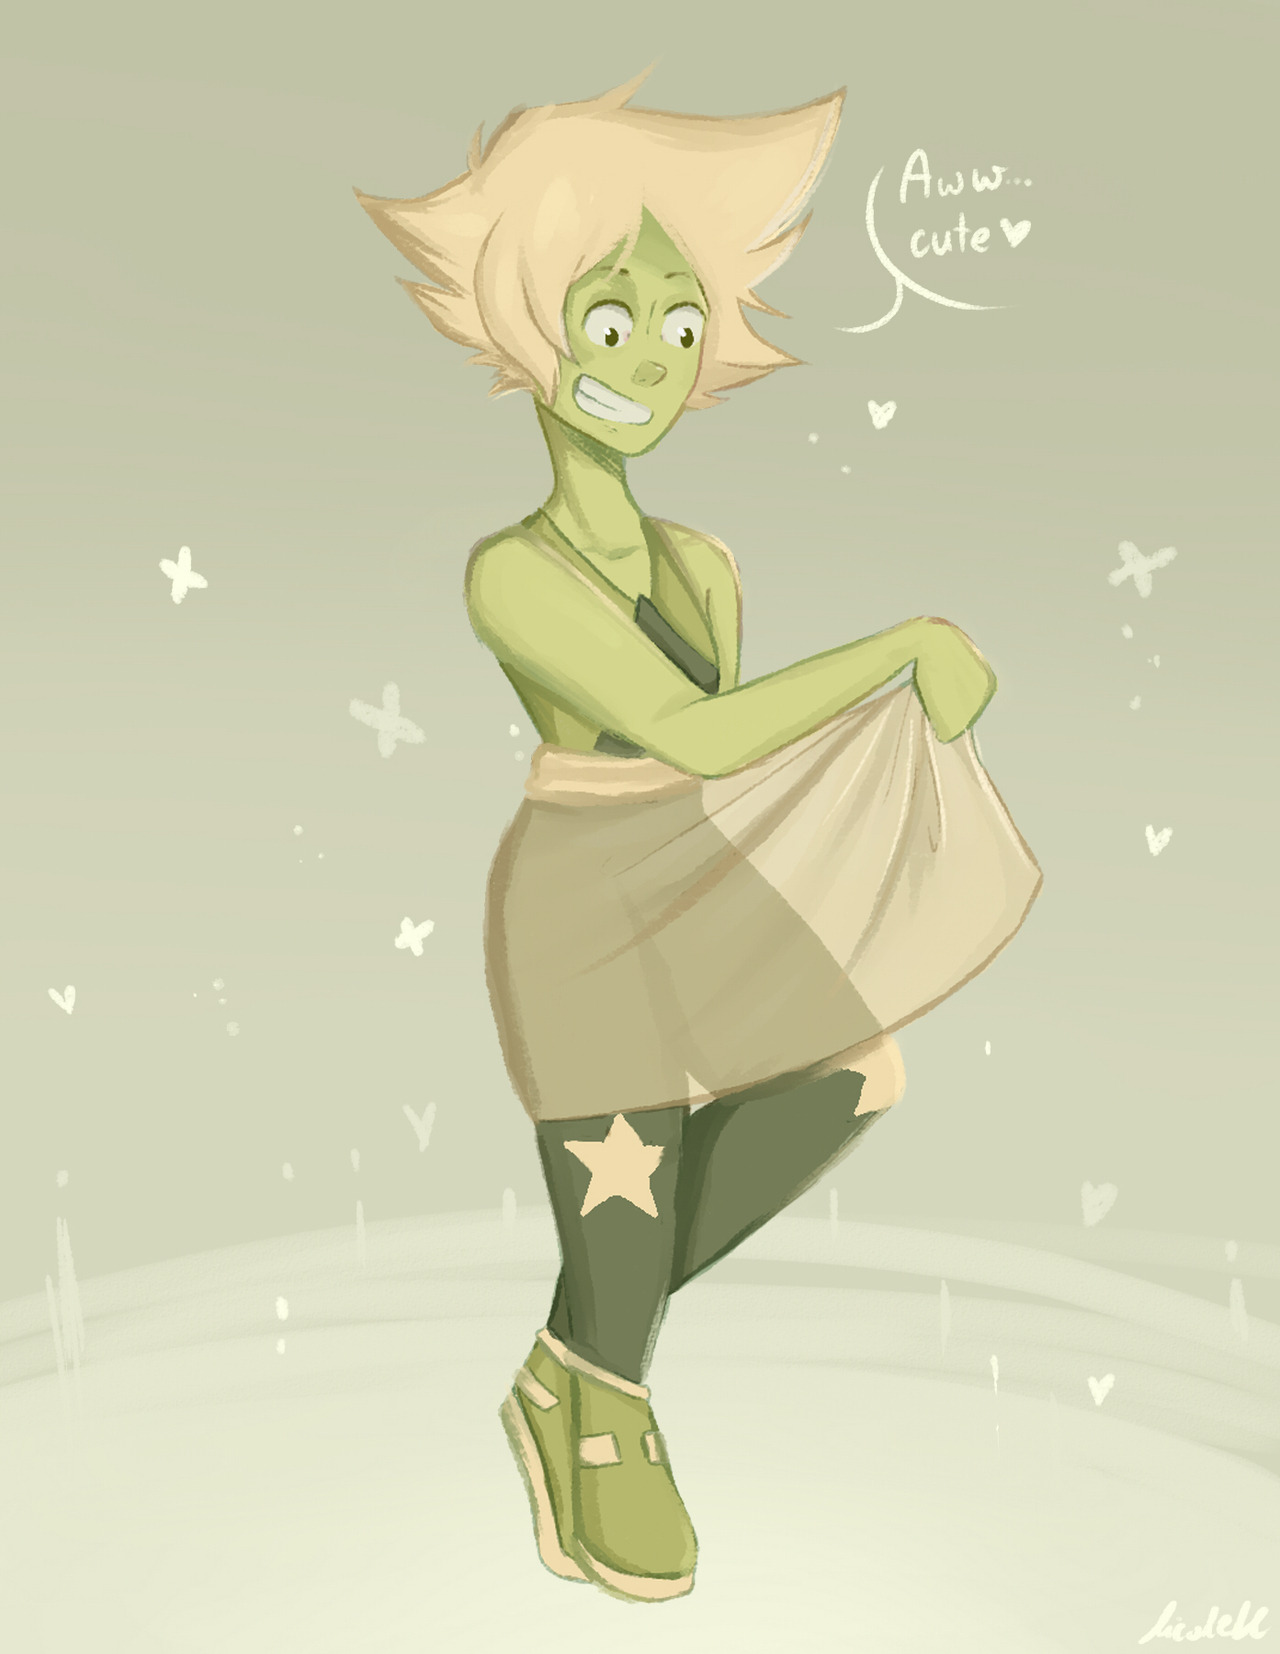 I want to see Peridot in new form :D